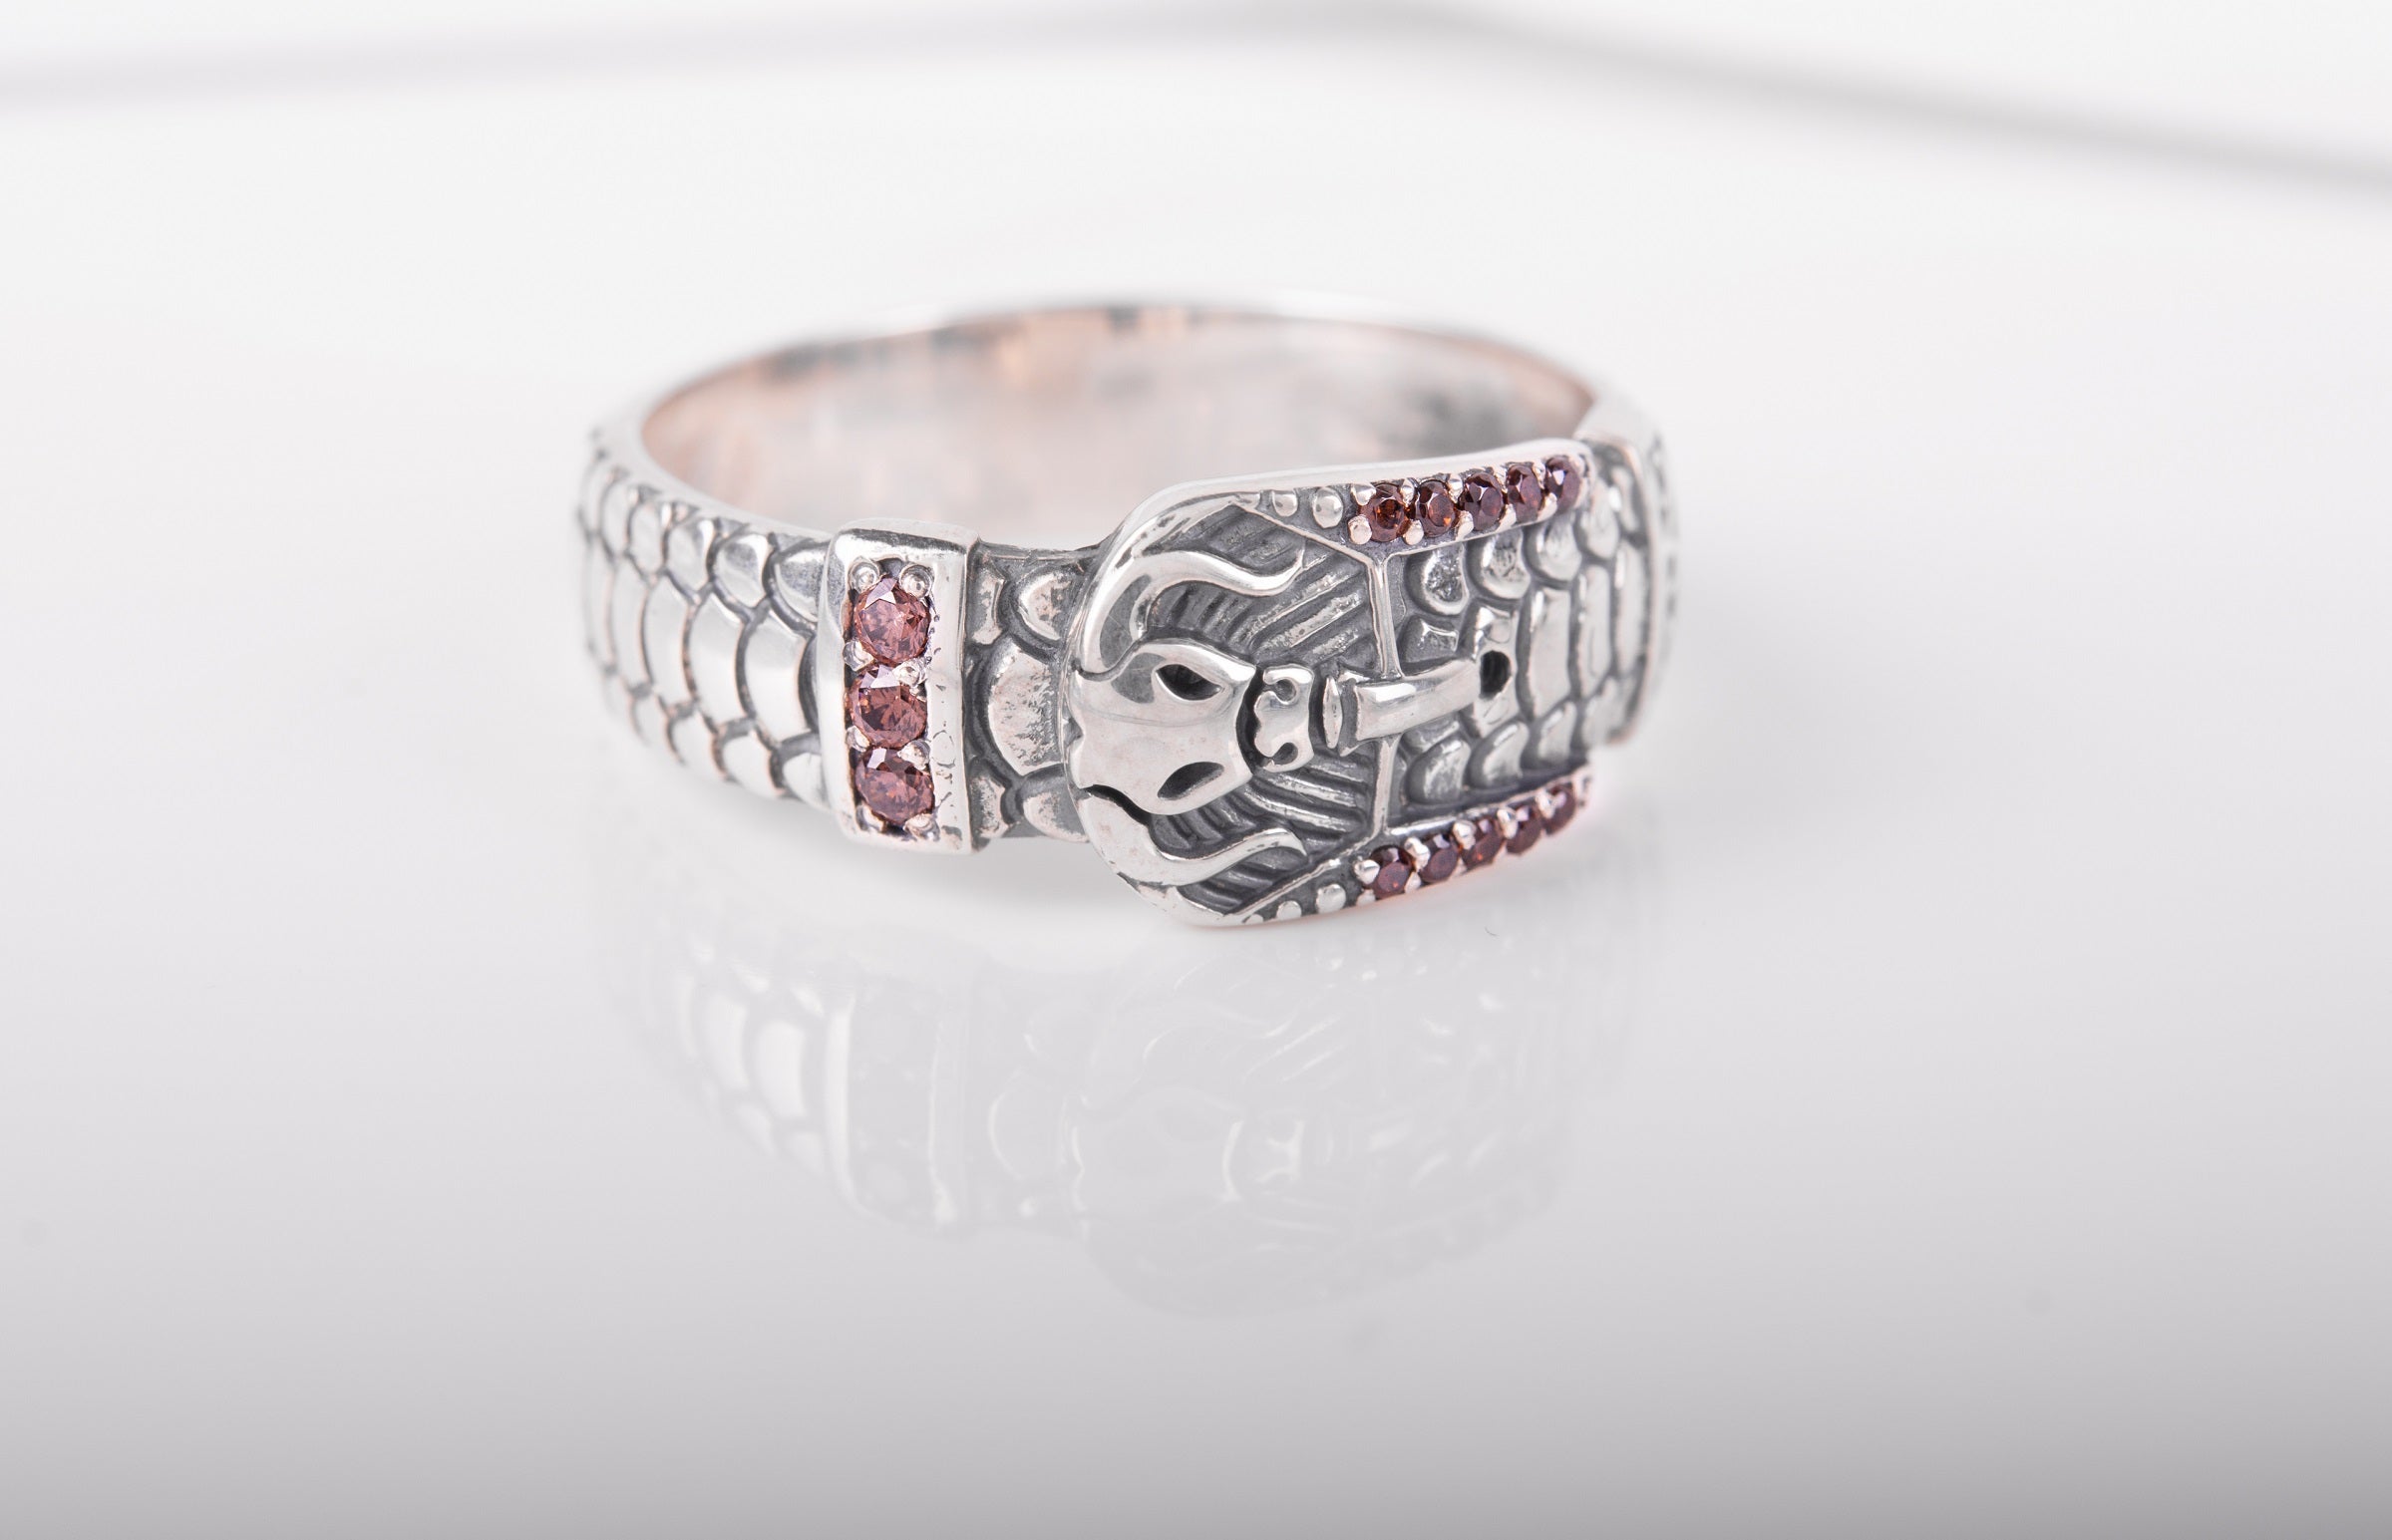 Unique Fashion Ring with Bull and Gems, 925 silver handmade Jewelry